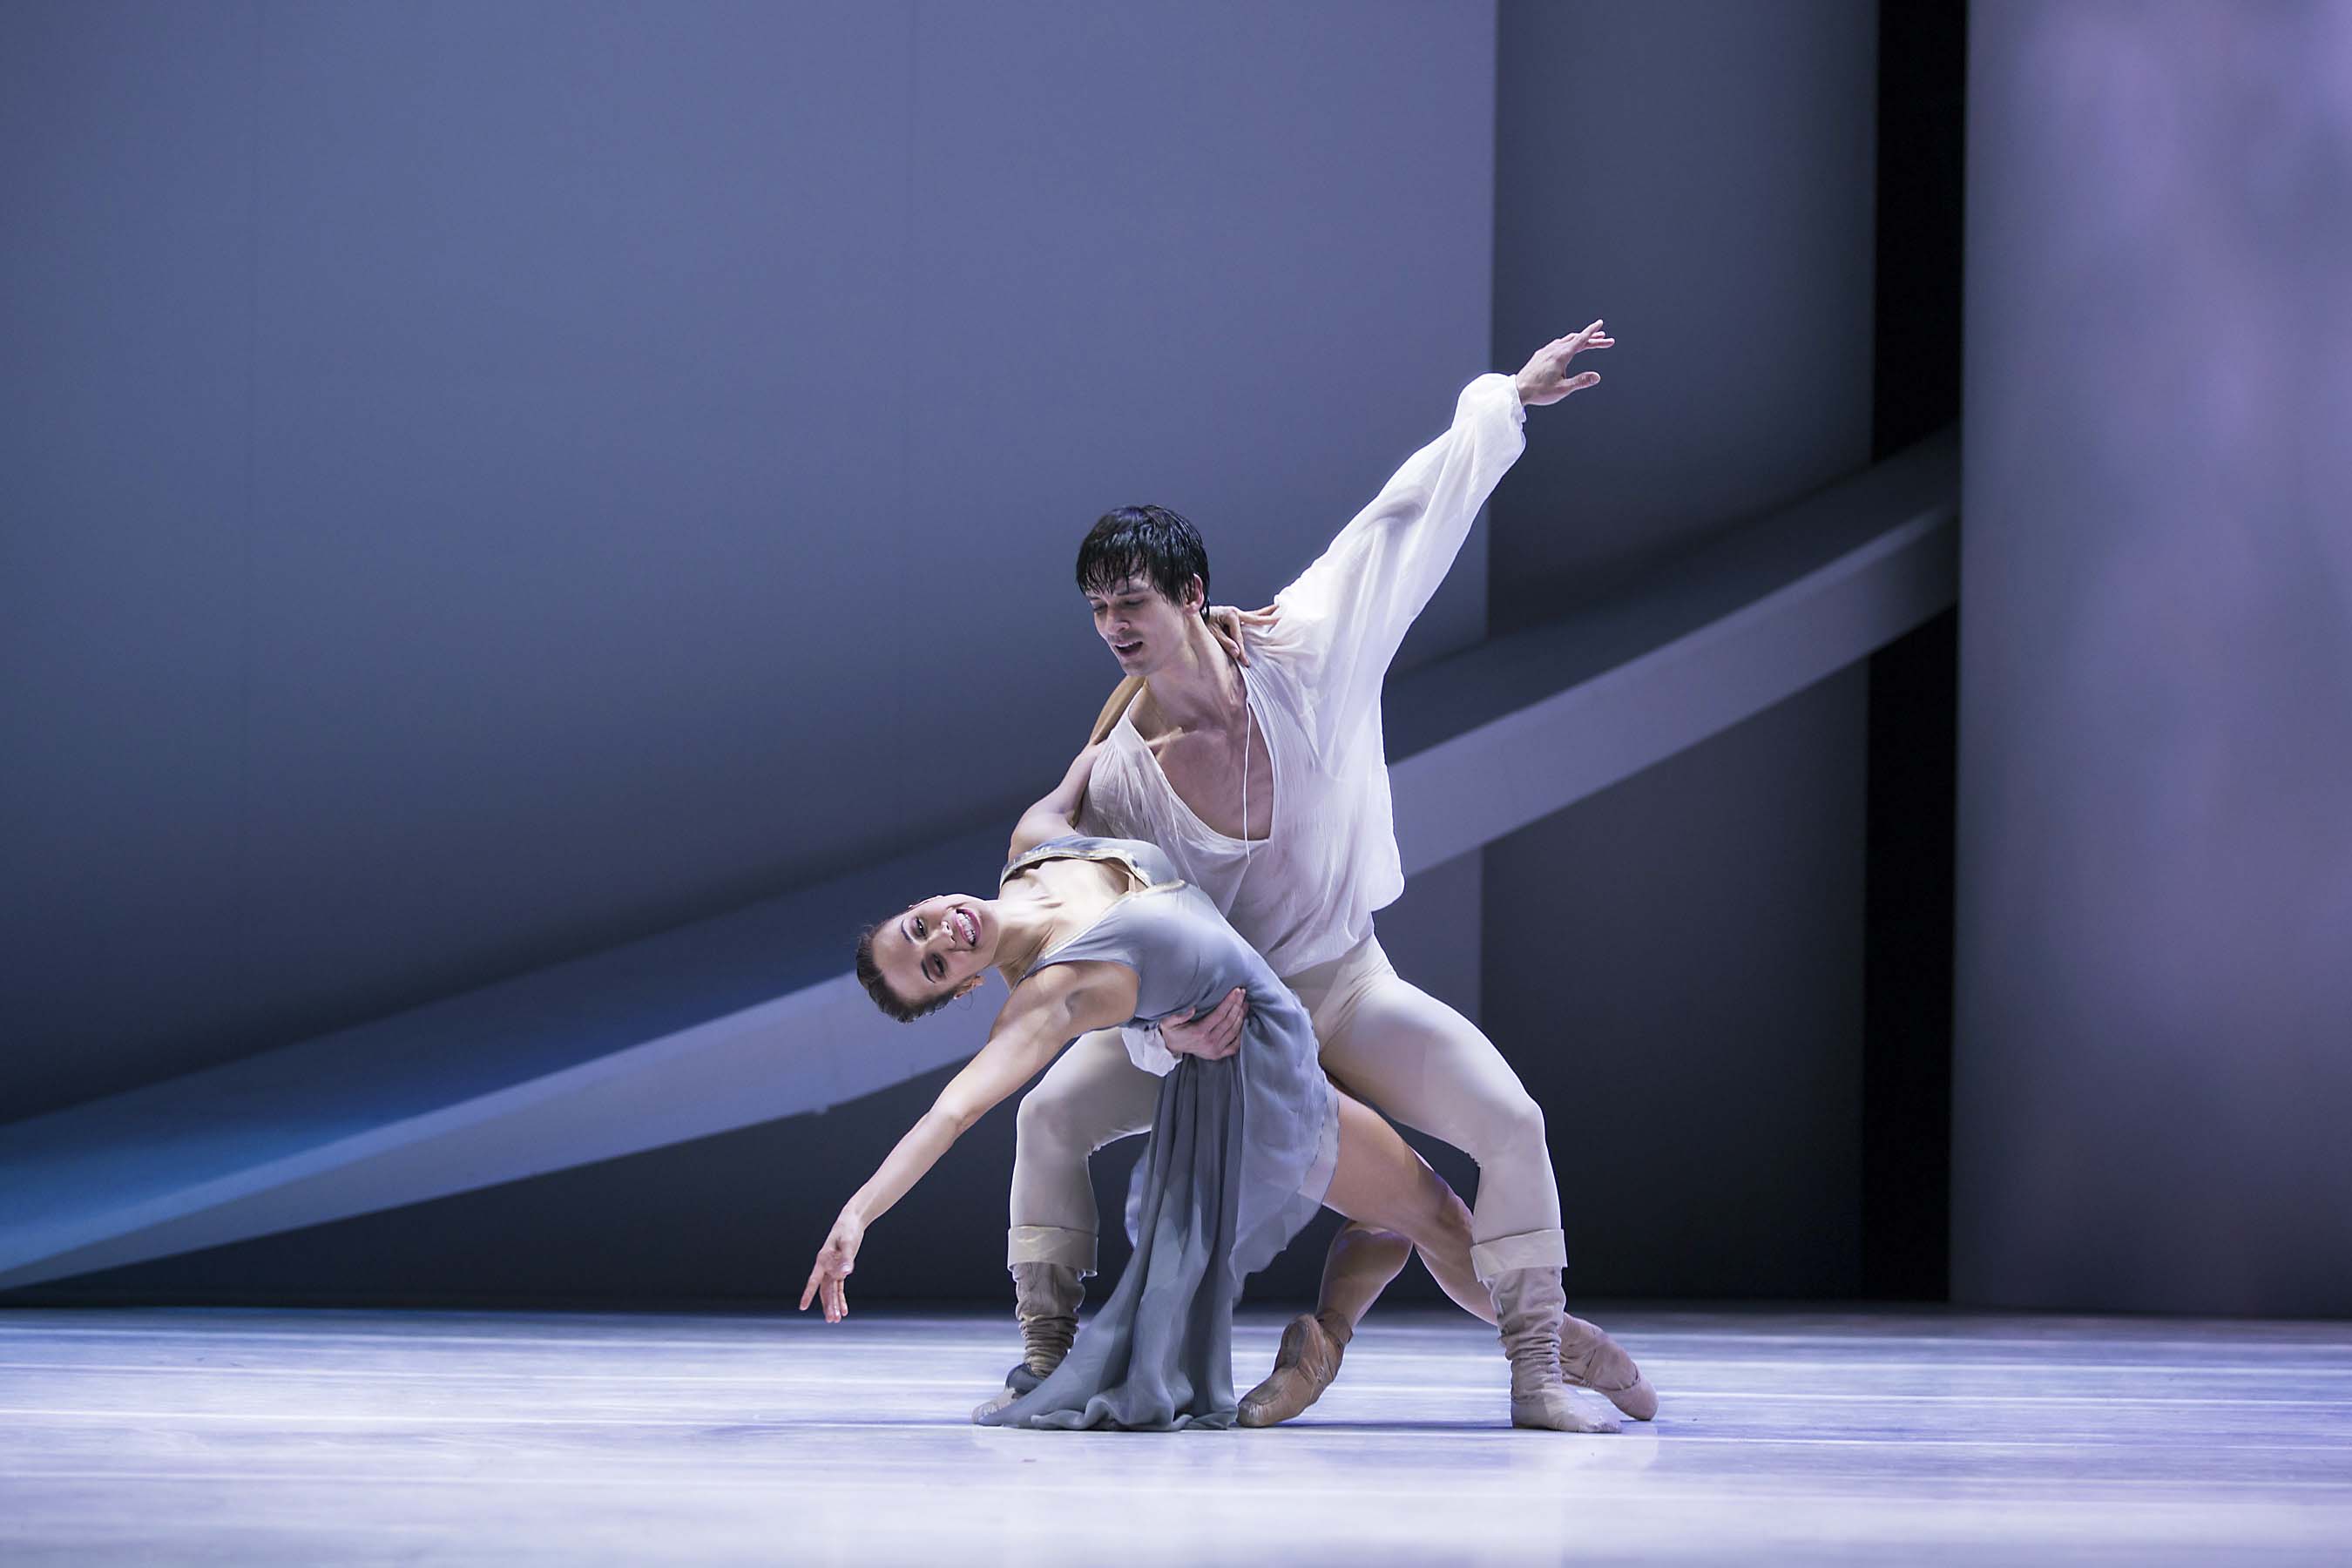 Noelani Pantastico and James Moore in Maillot's Roméo et Juliette. © Angela Sterling